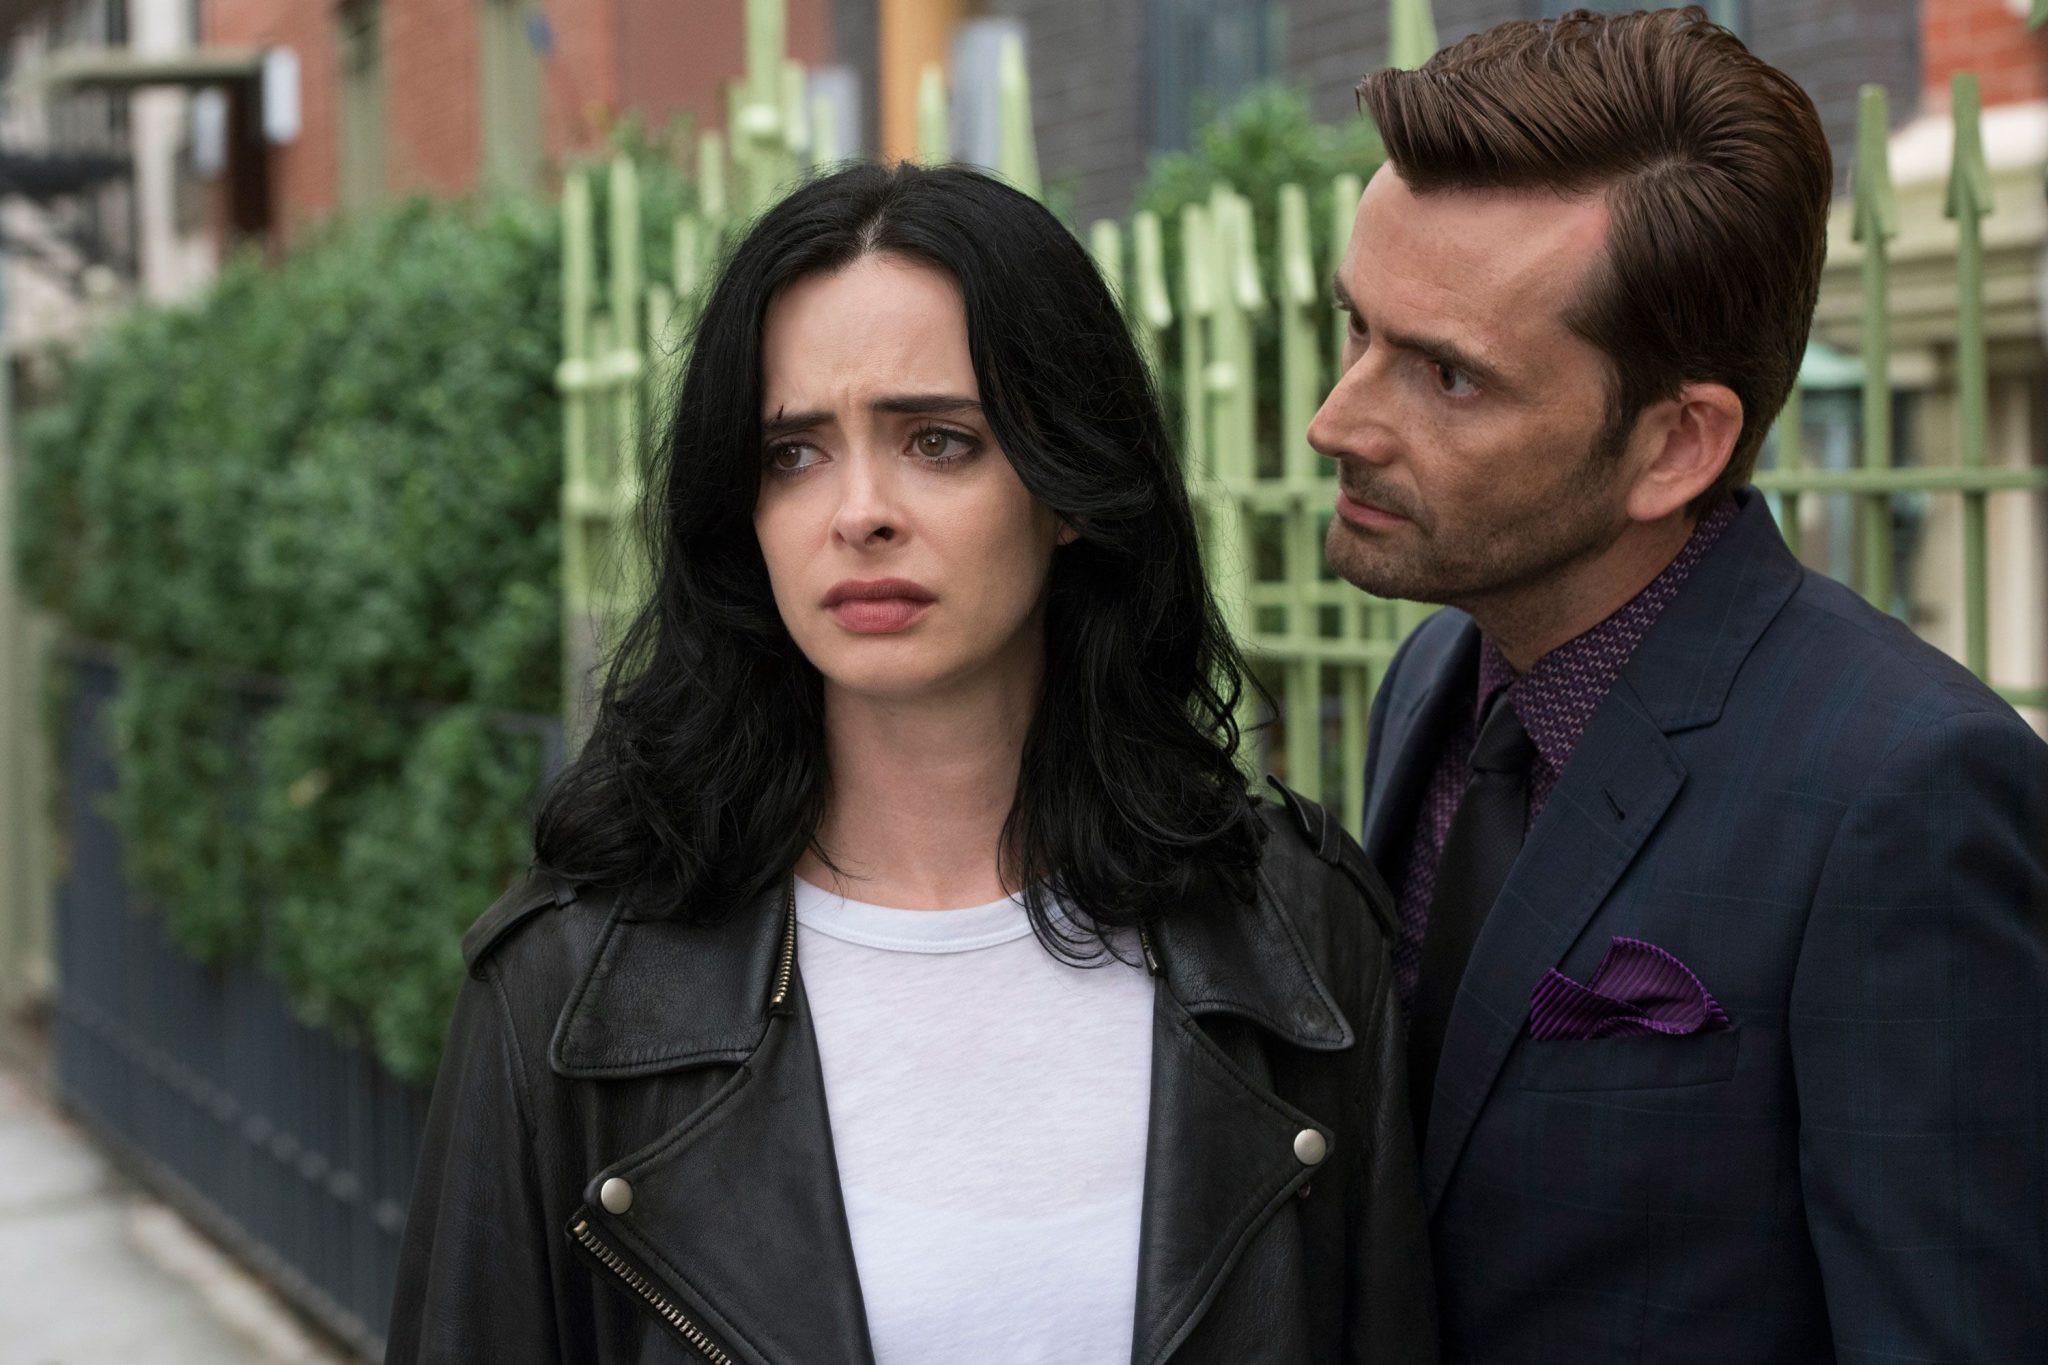 Jessica Jones Season 3 More Updates About Cast And Others